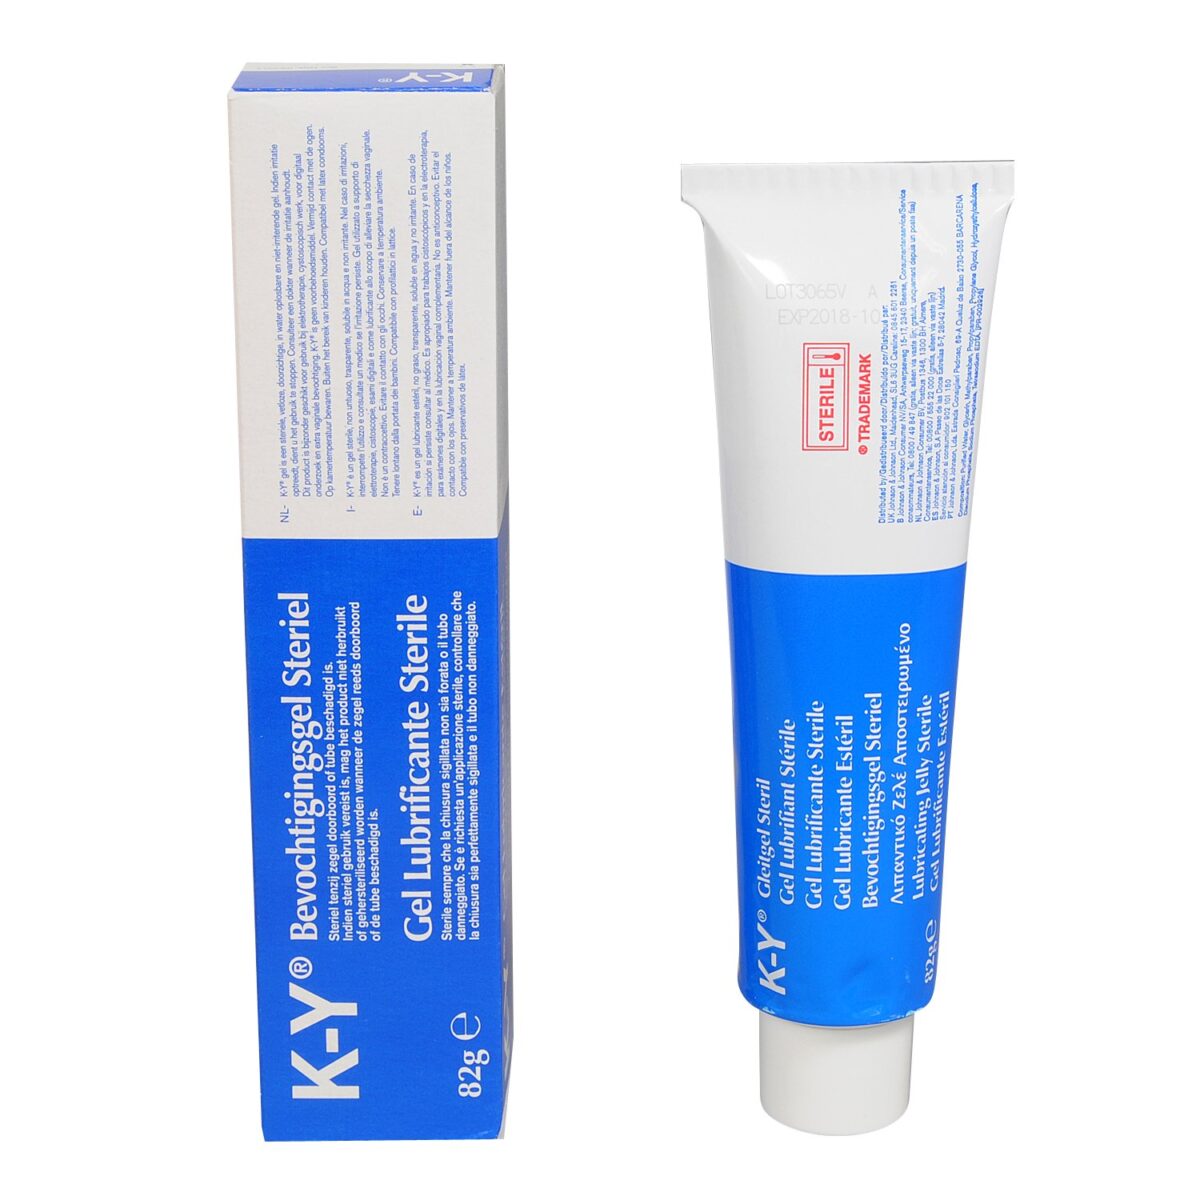 KY Jelly Personal Lubricating Gel 82g5